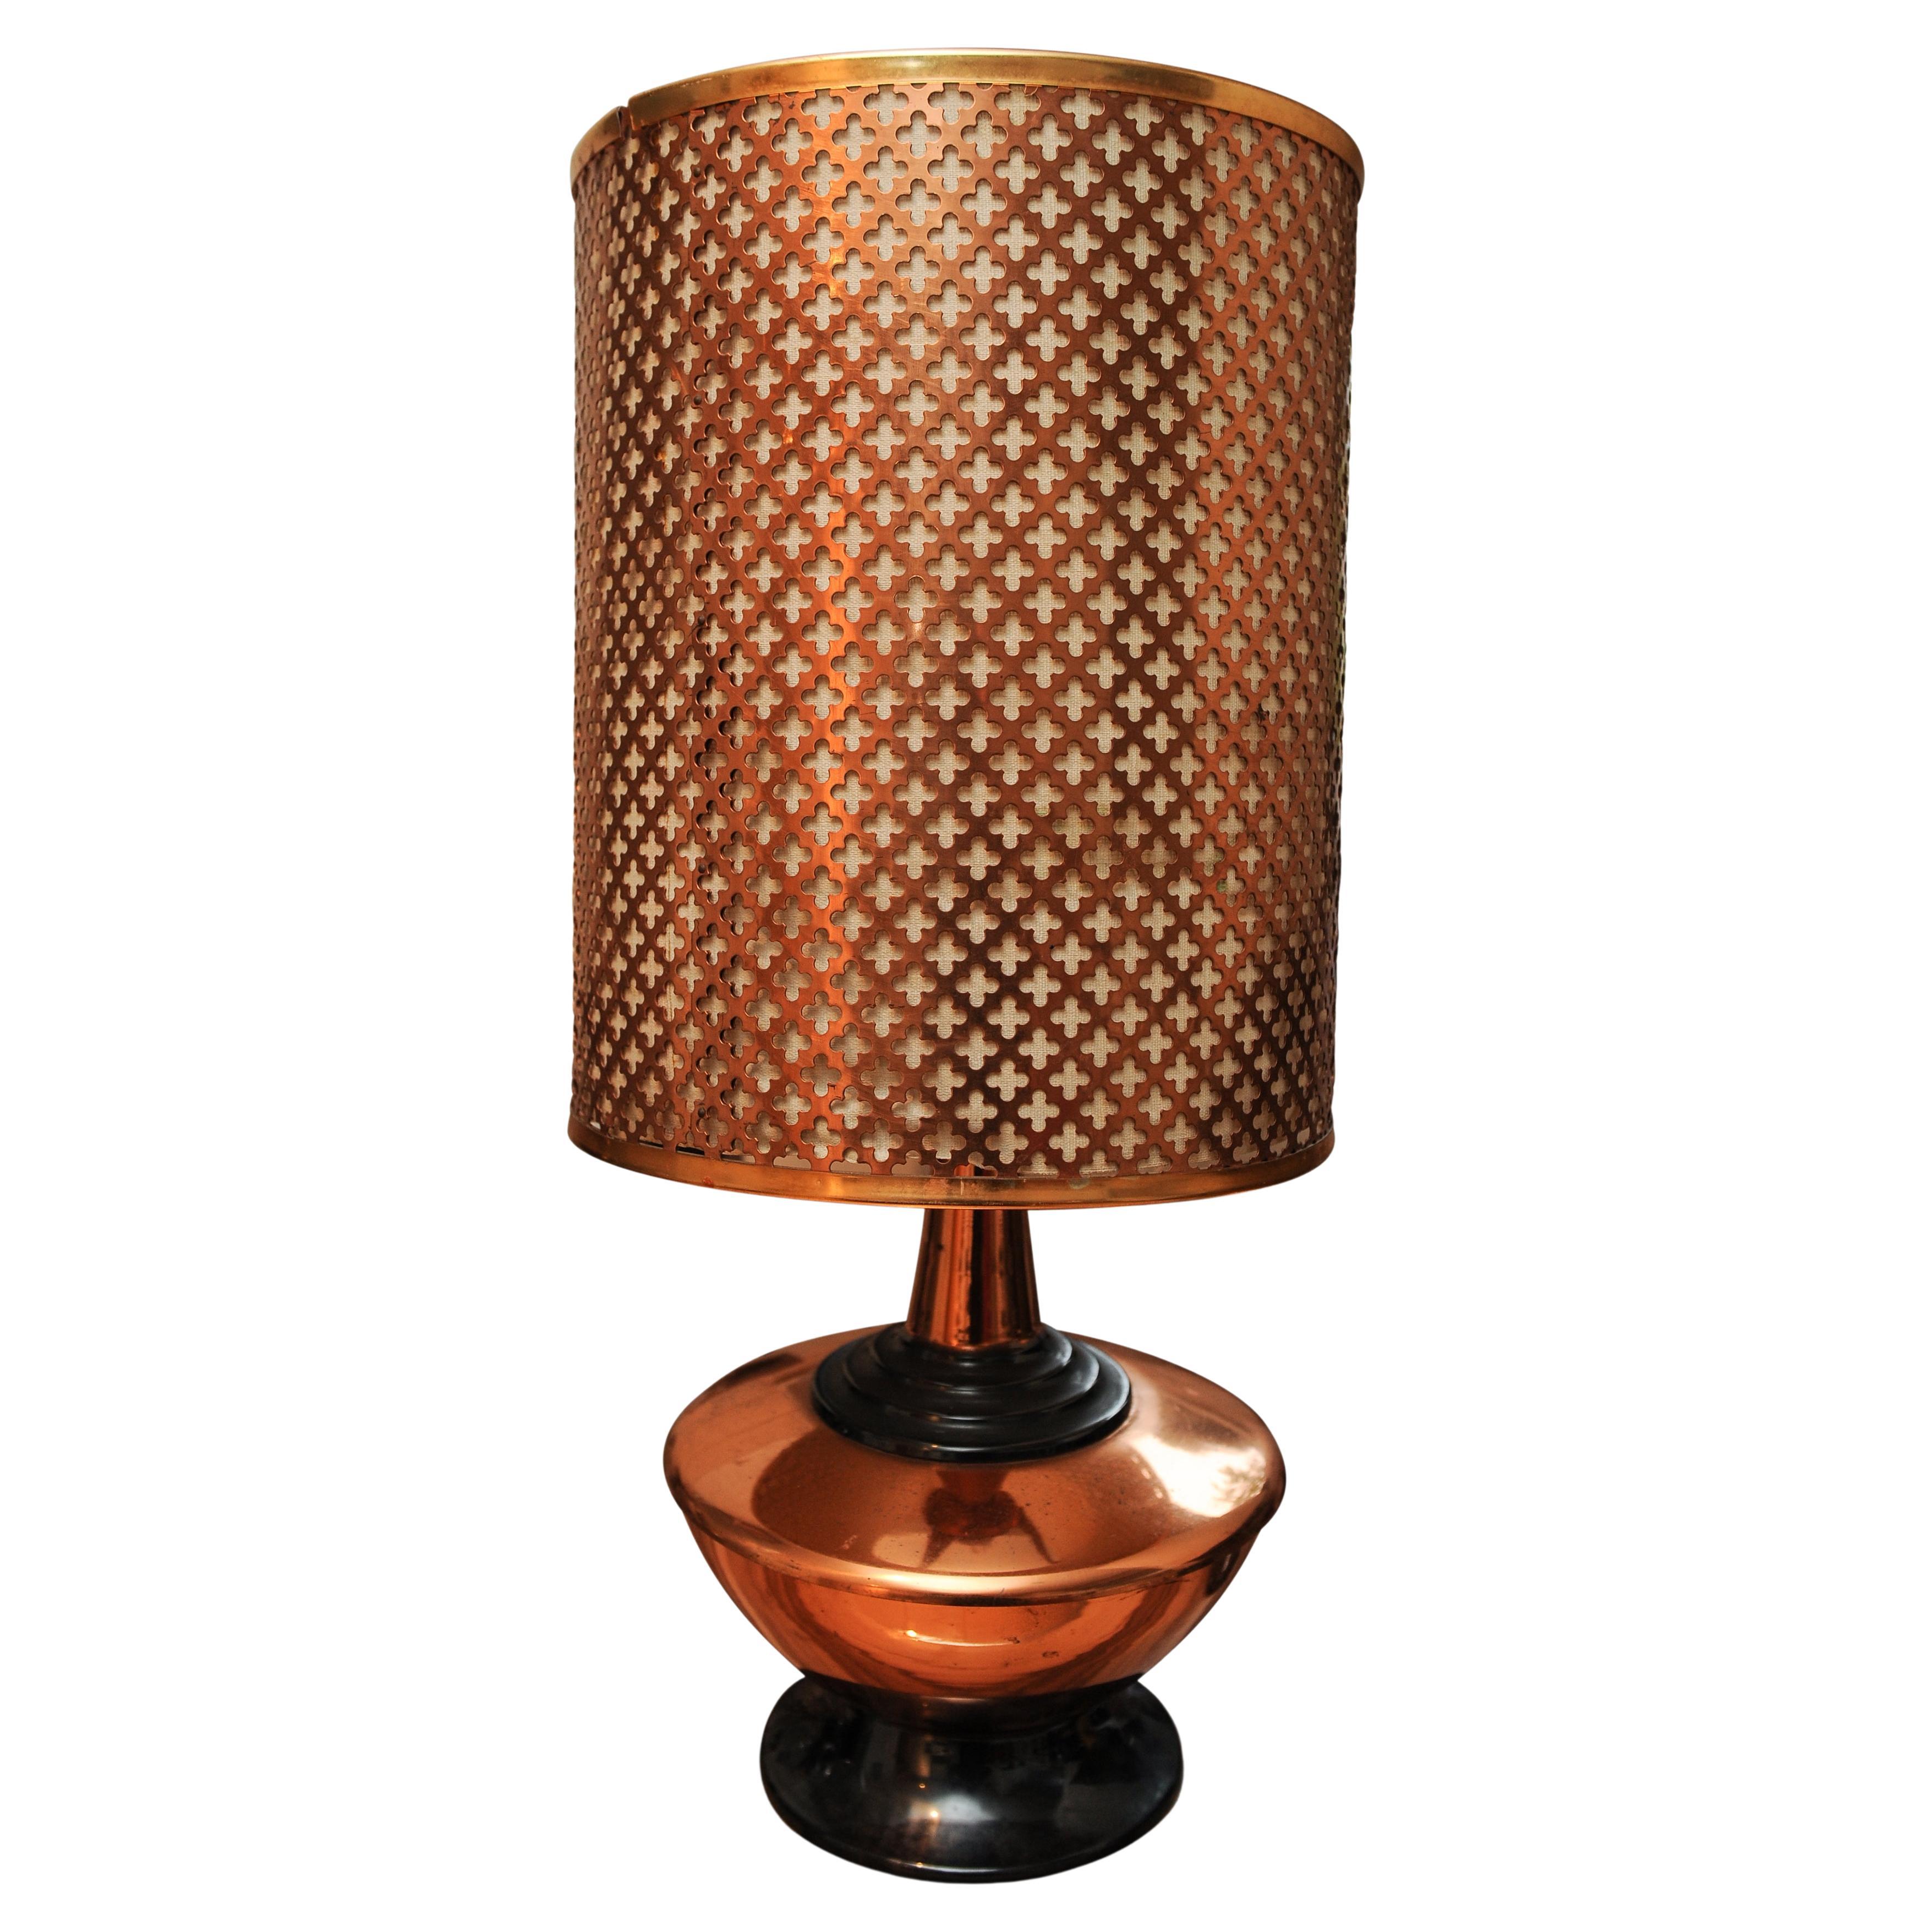 A Zambian Copper Table Lamp With A Repeating Lattice Work Pattern For Sale